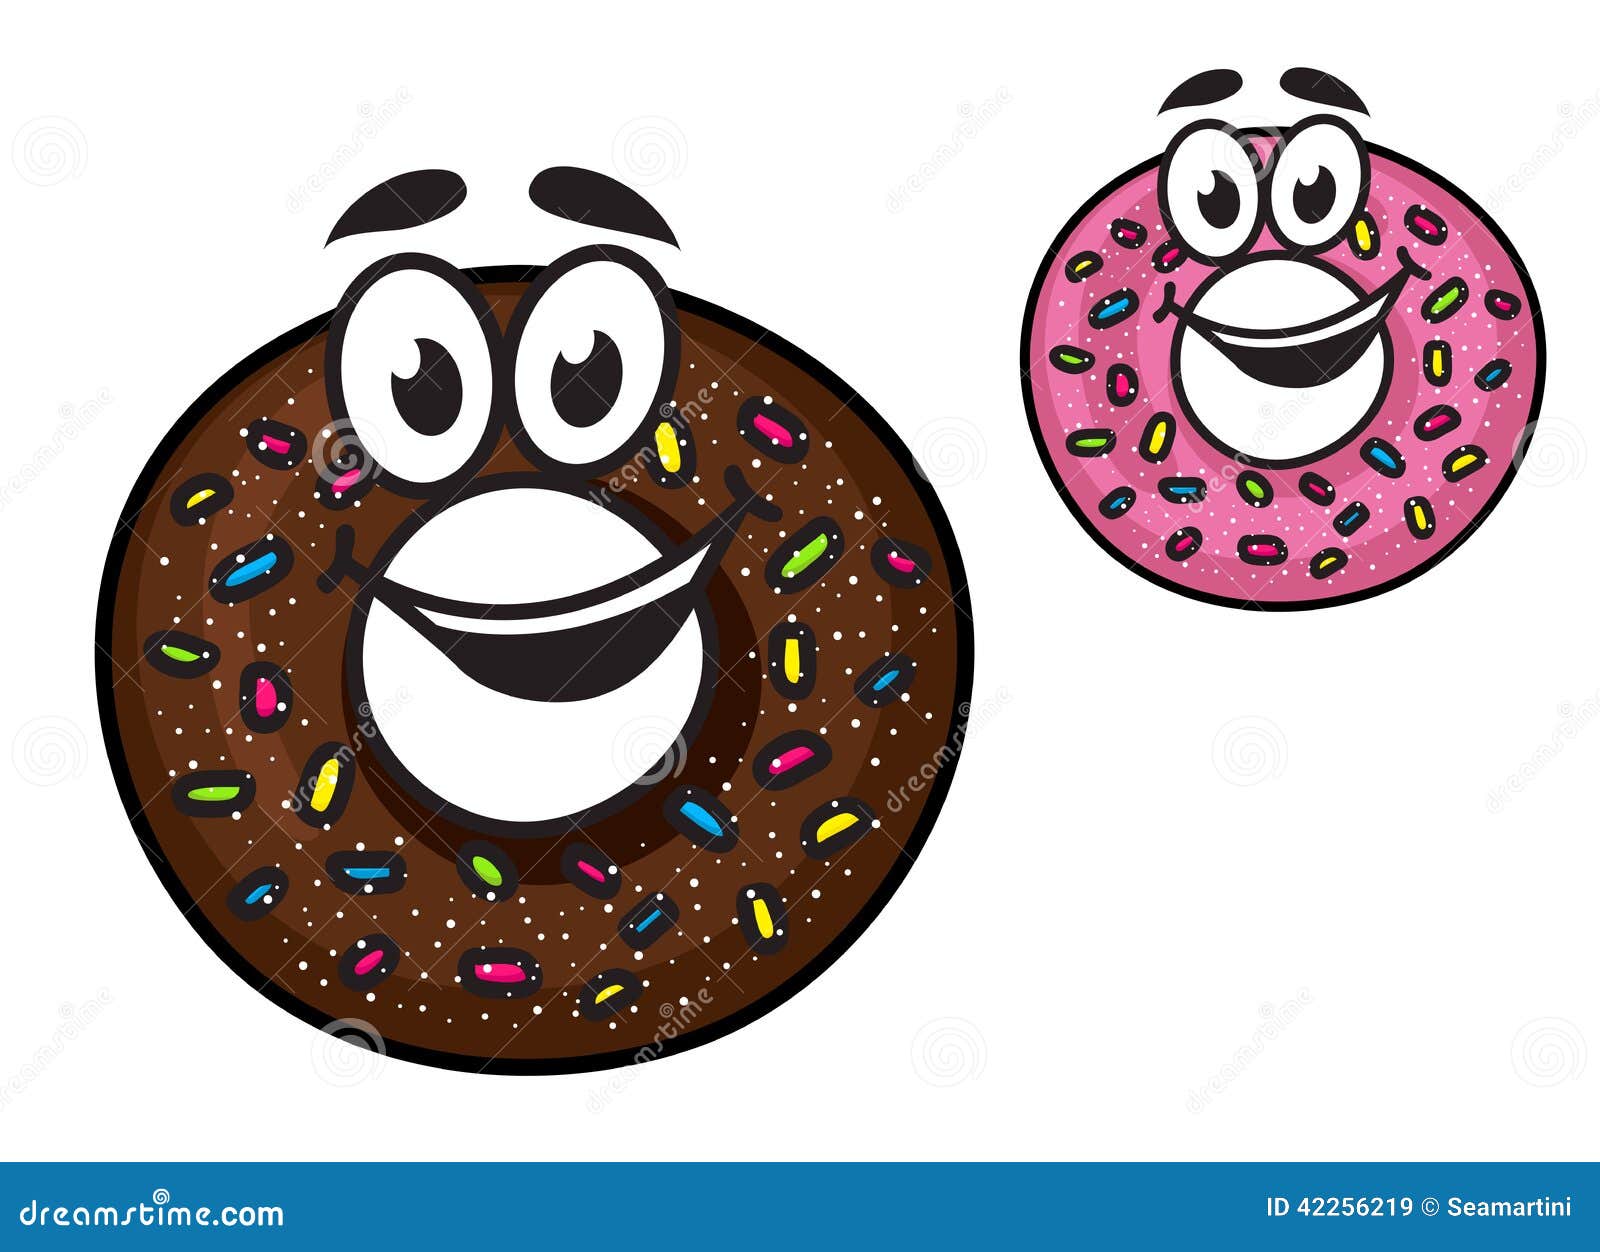 Cute happy doughnuts stock vector. Illustration of cafe - 42256219